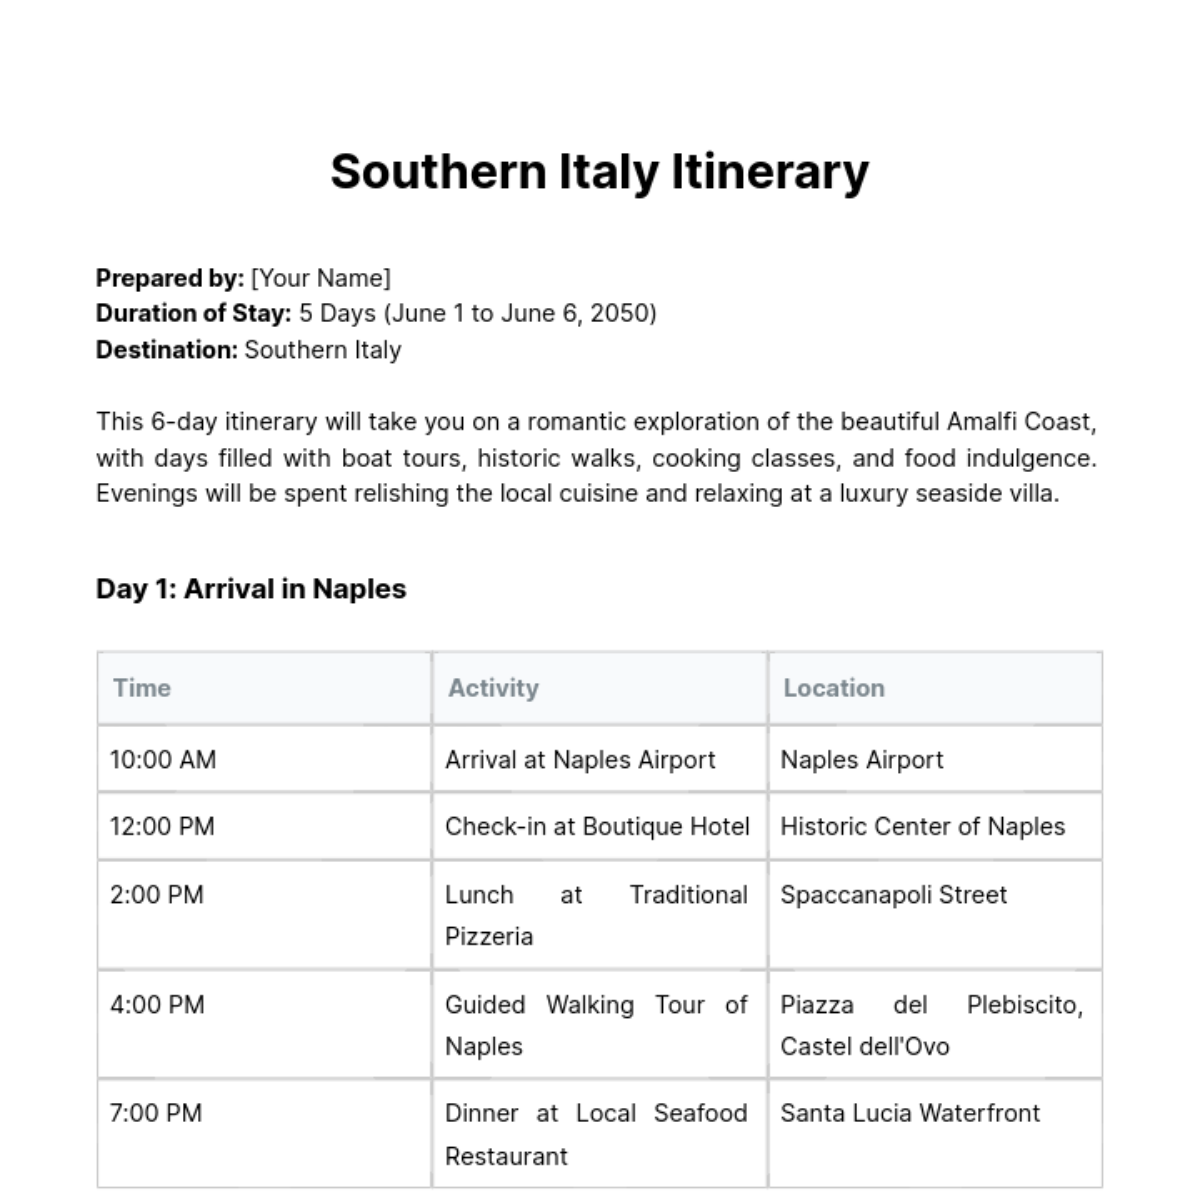 Southern Italy Itinerary Template